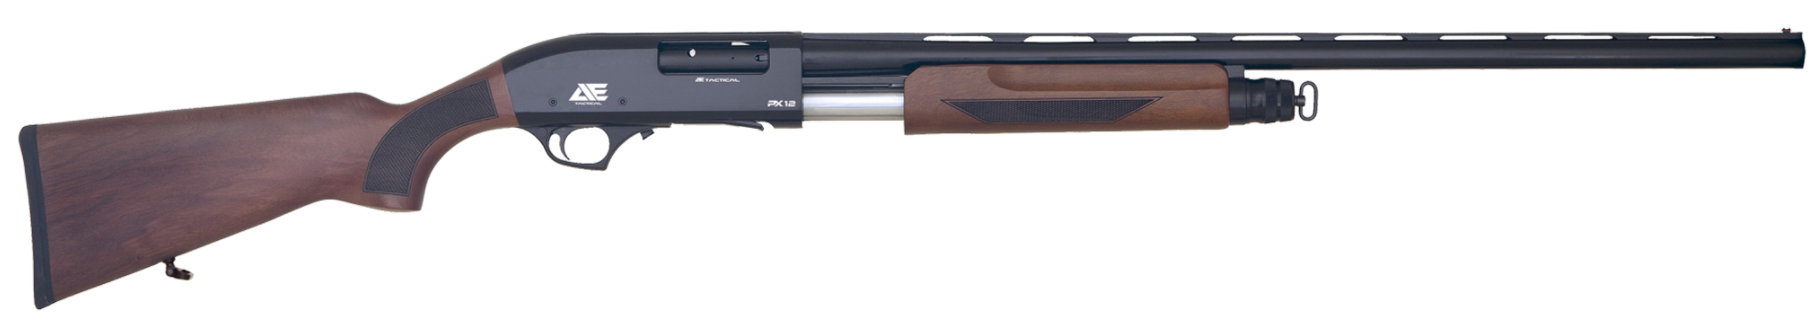 AE TACTICAL PX-101